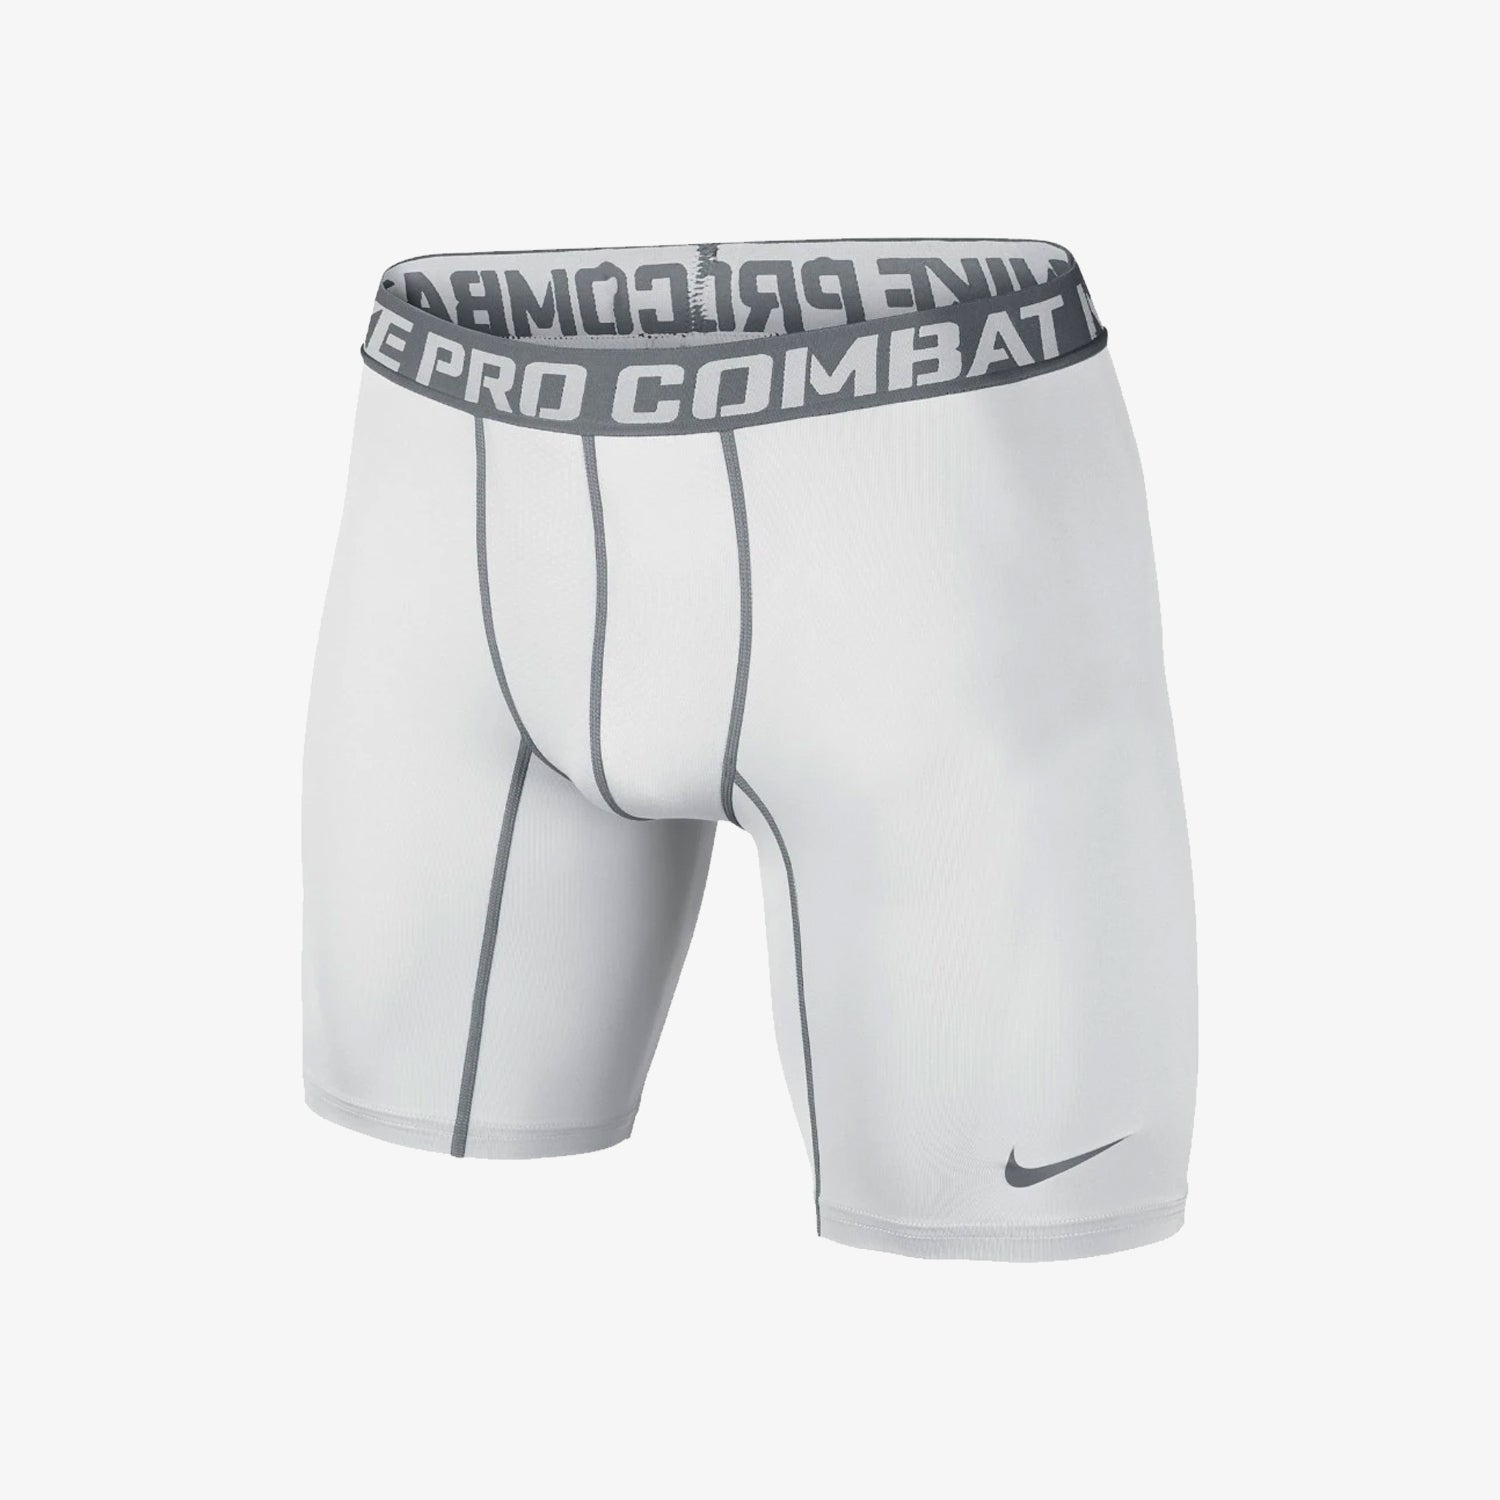 Nike Pro Combat Padded Compression Shorts Men's White New with